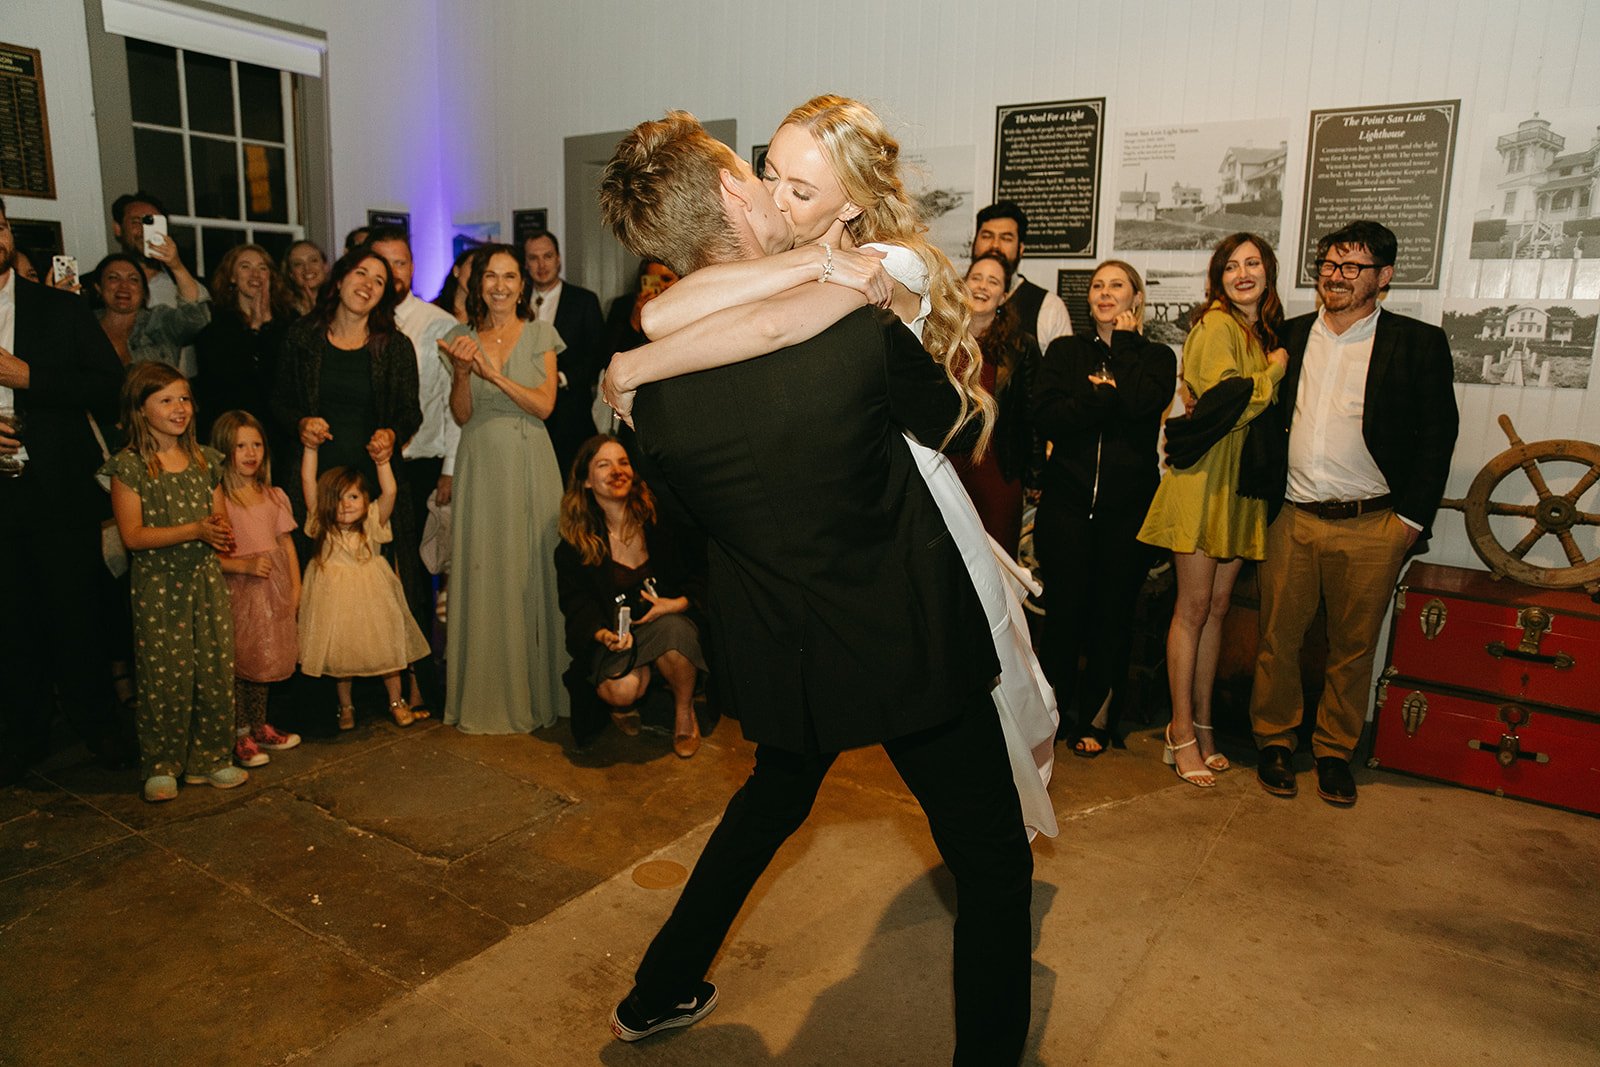 Bride and groom dancing and kissing on the dance floor during wedding reception